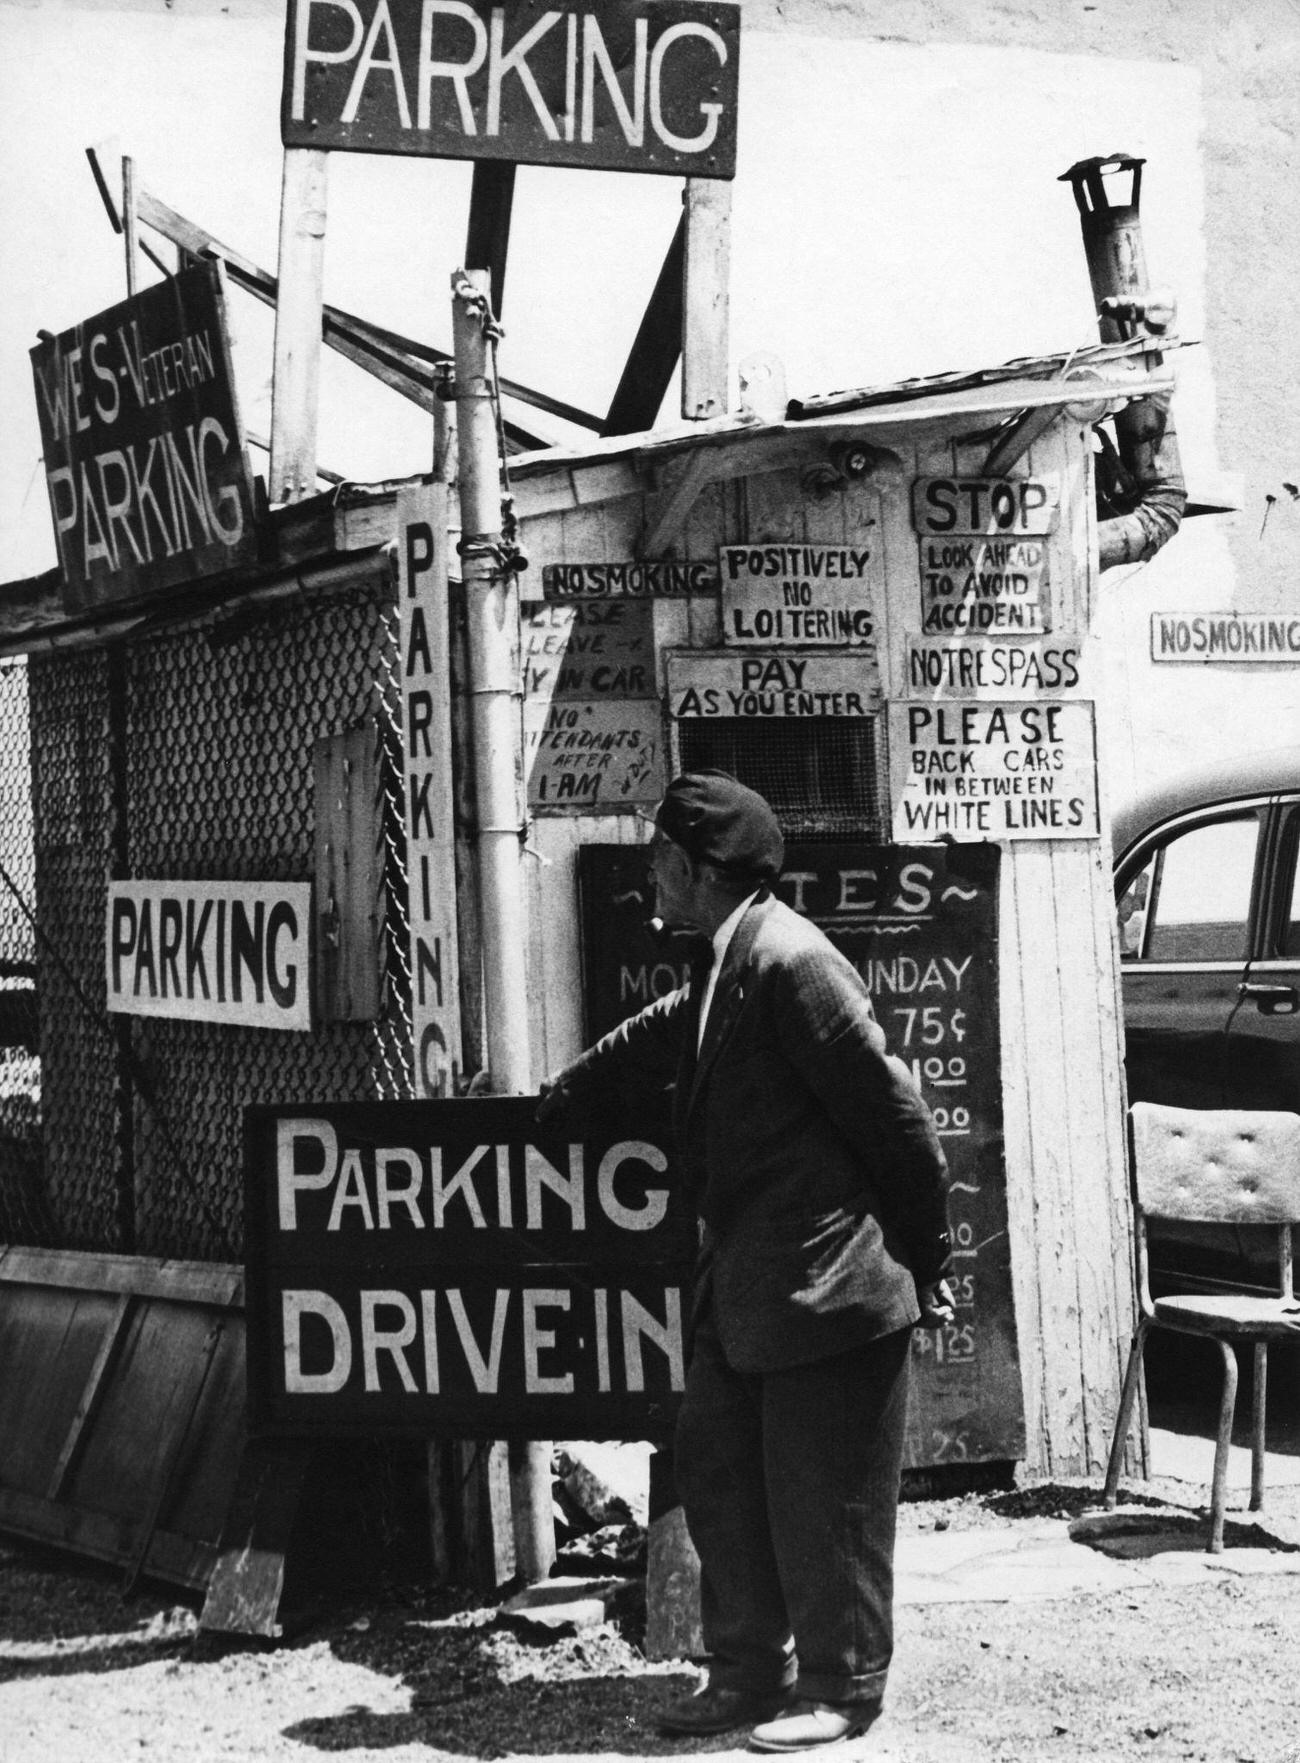 Car Park Attendant Among Signs In Brooklyn Heights, 1958.